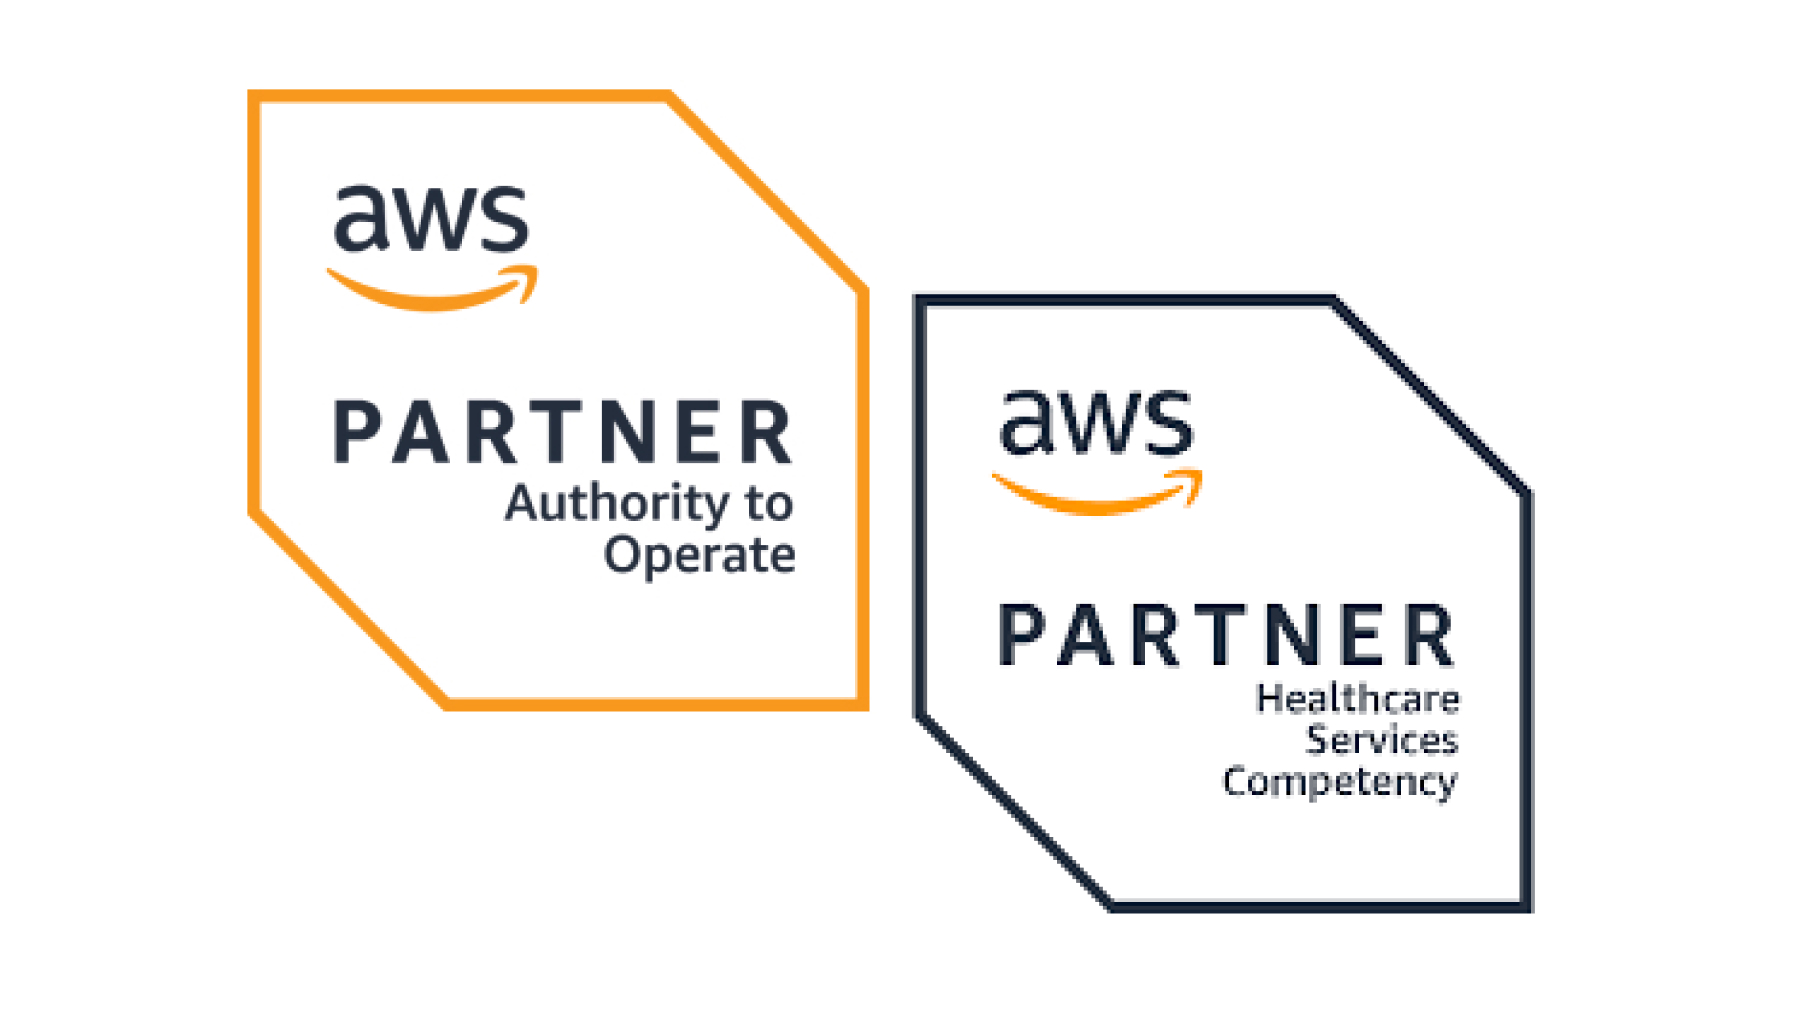 Amazon Web Services authority to Operate and Healthcare Services Competancy